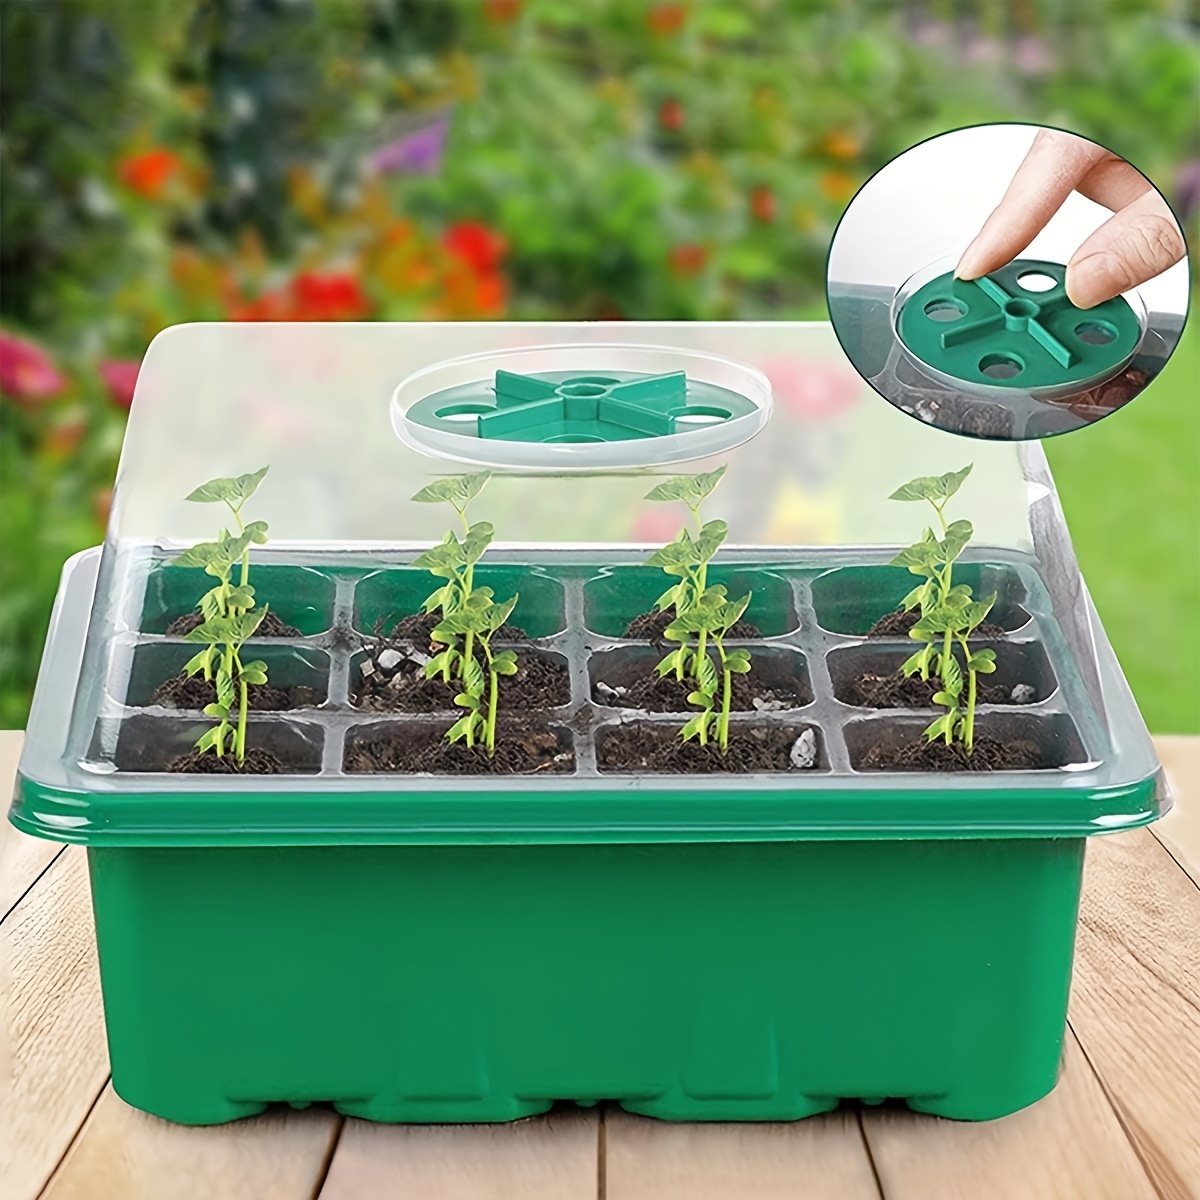 

1 Pack, 12-hole Seedling Starter Tray, Plastic Greenhouse Kit With Transparent Lid, 7.09x6.02x4.53 Inches, Contemporary Style, Insulation And Moisture Control For Optimal Plant Growth